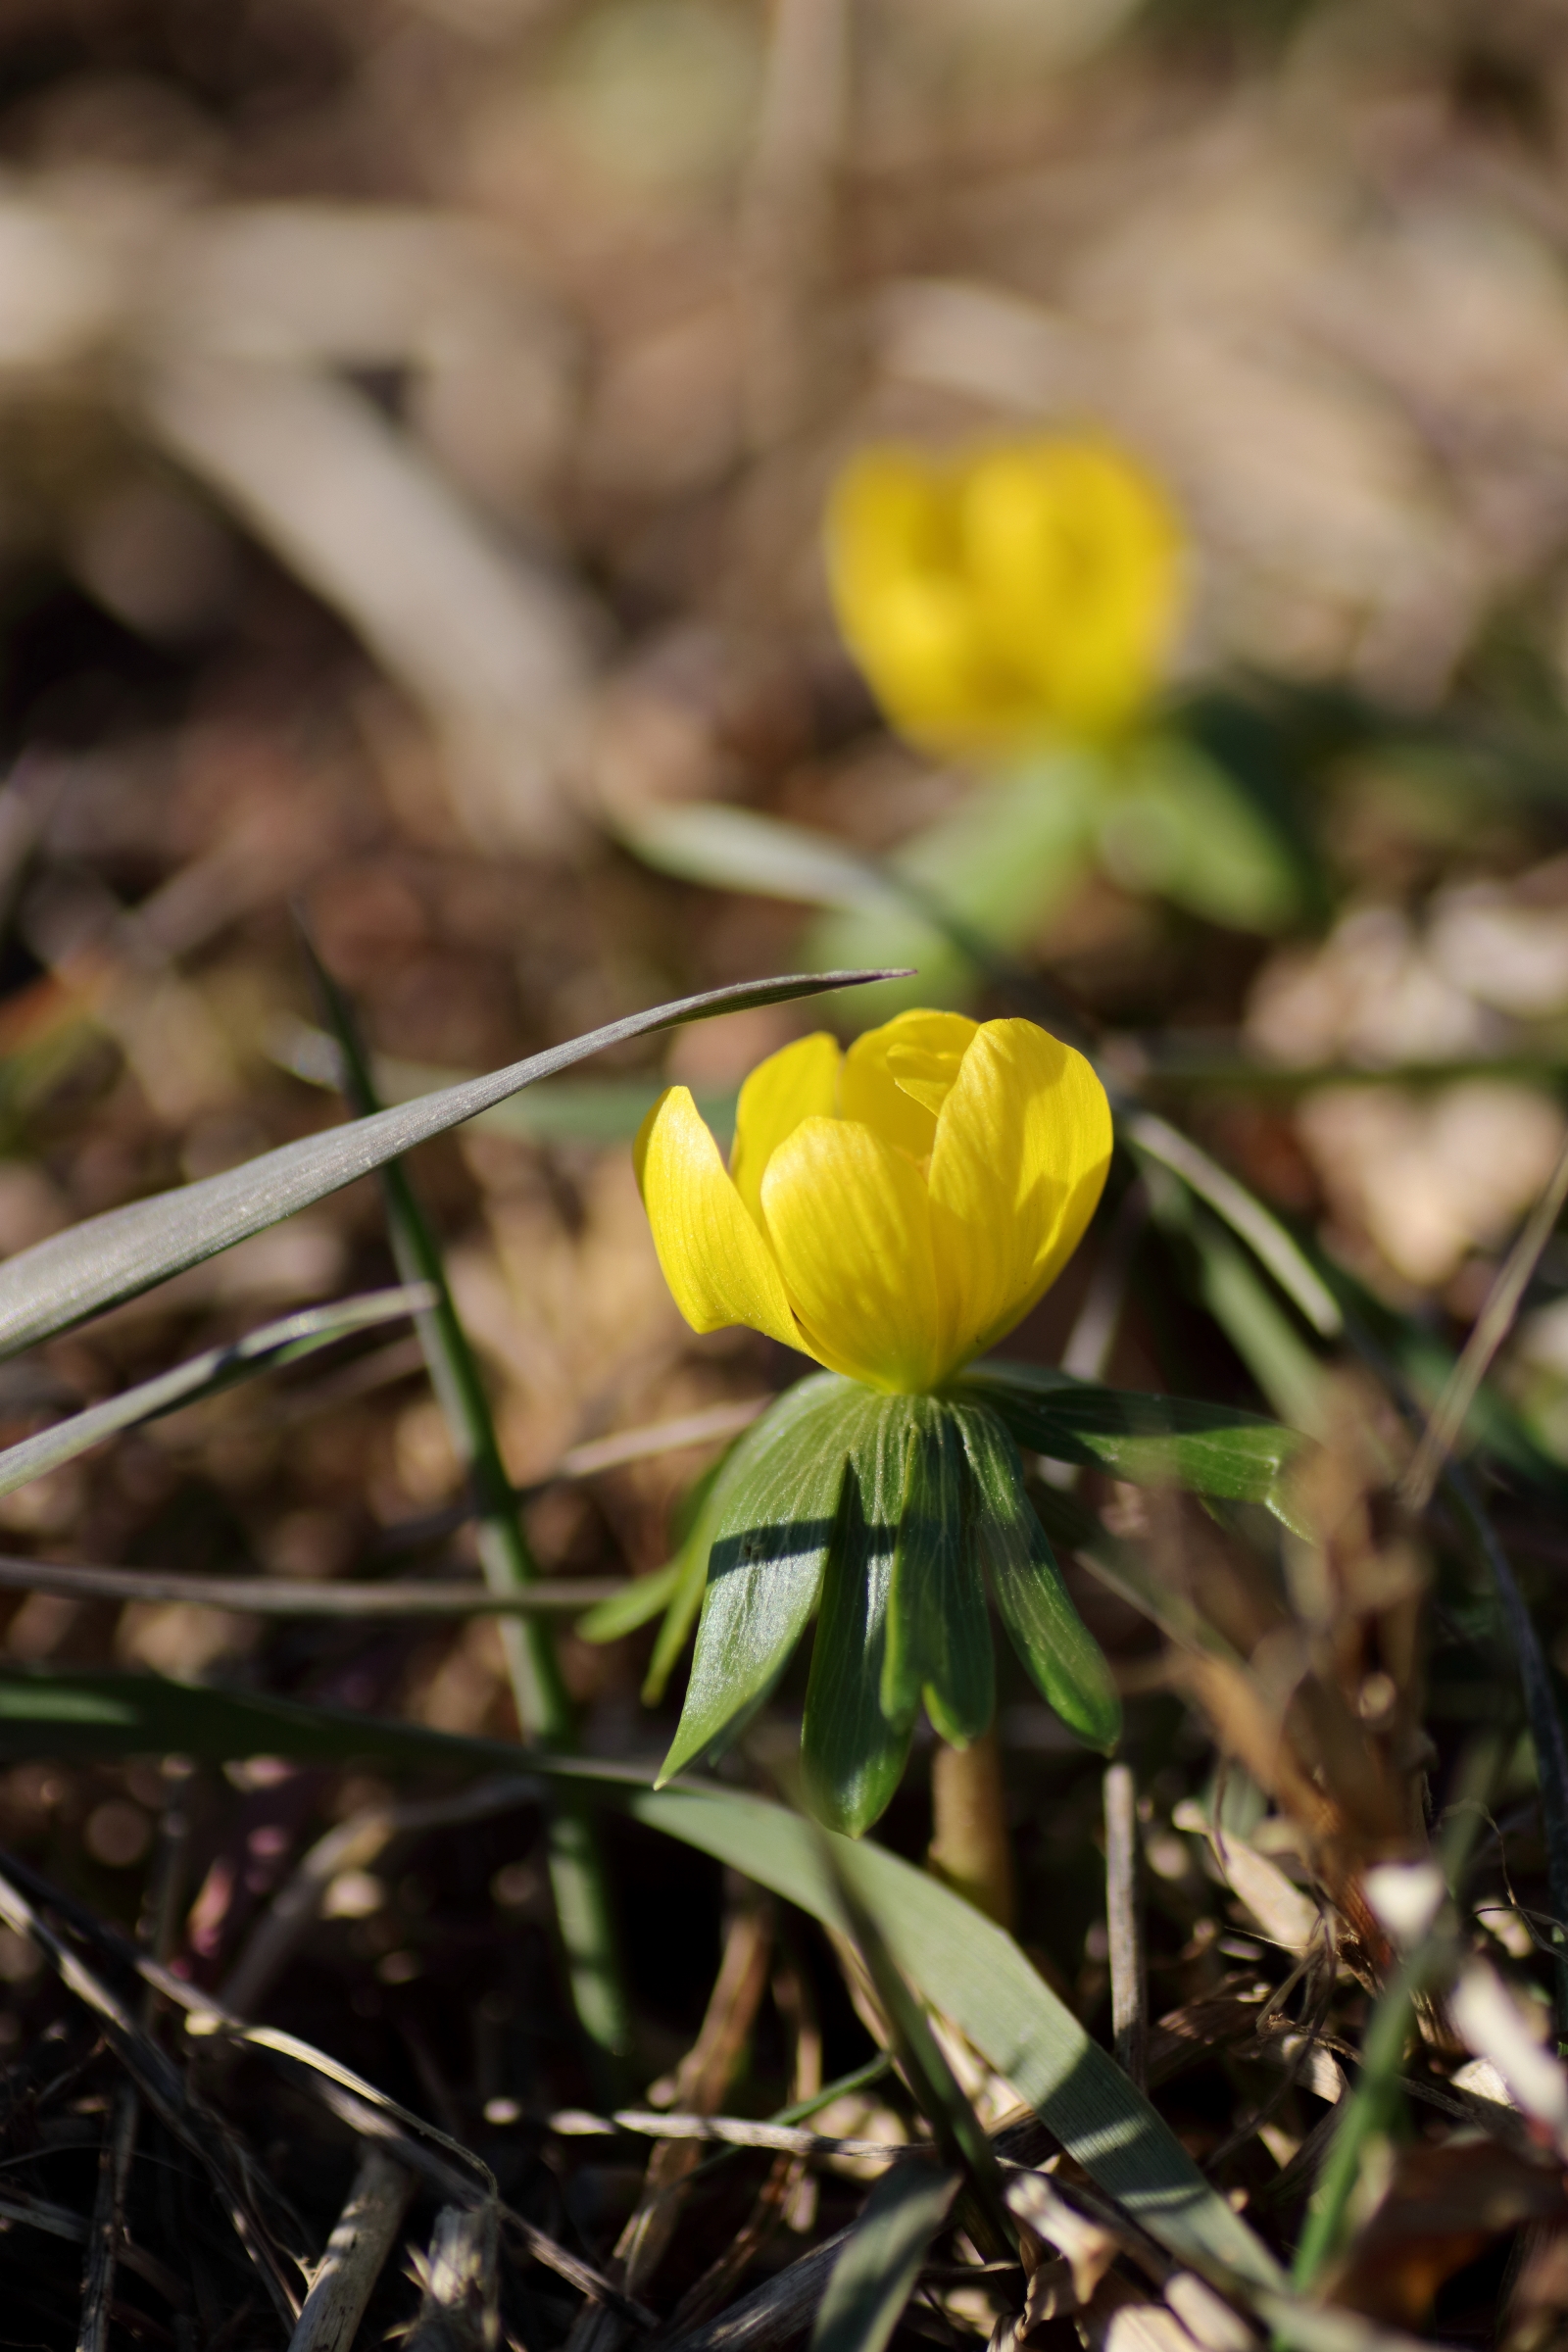 Winter aconite - Lateral view of the plant